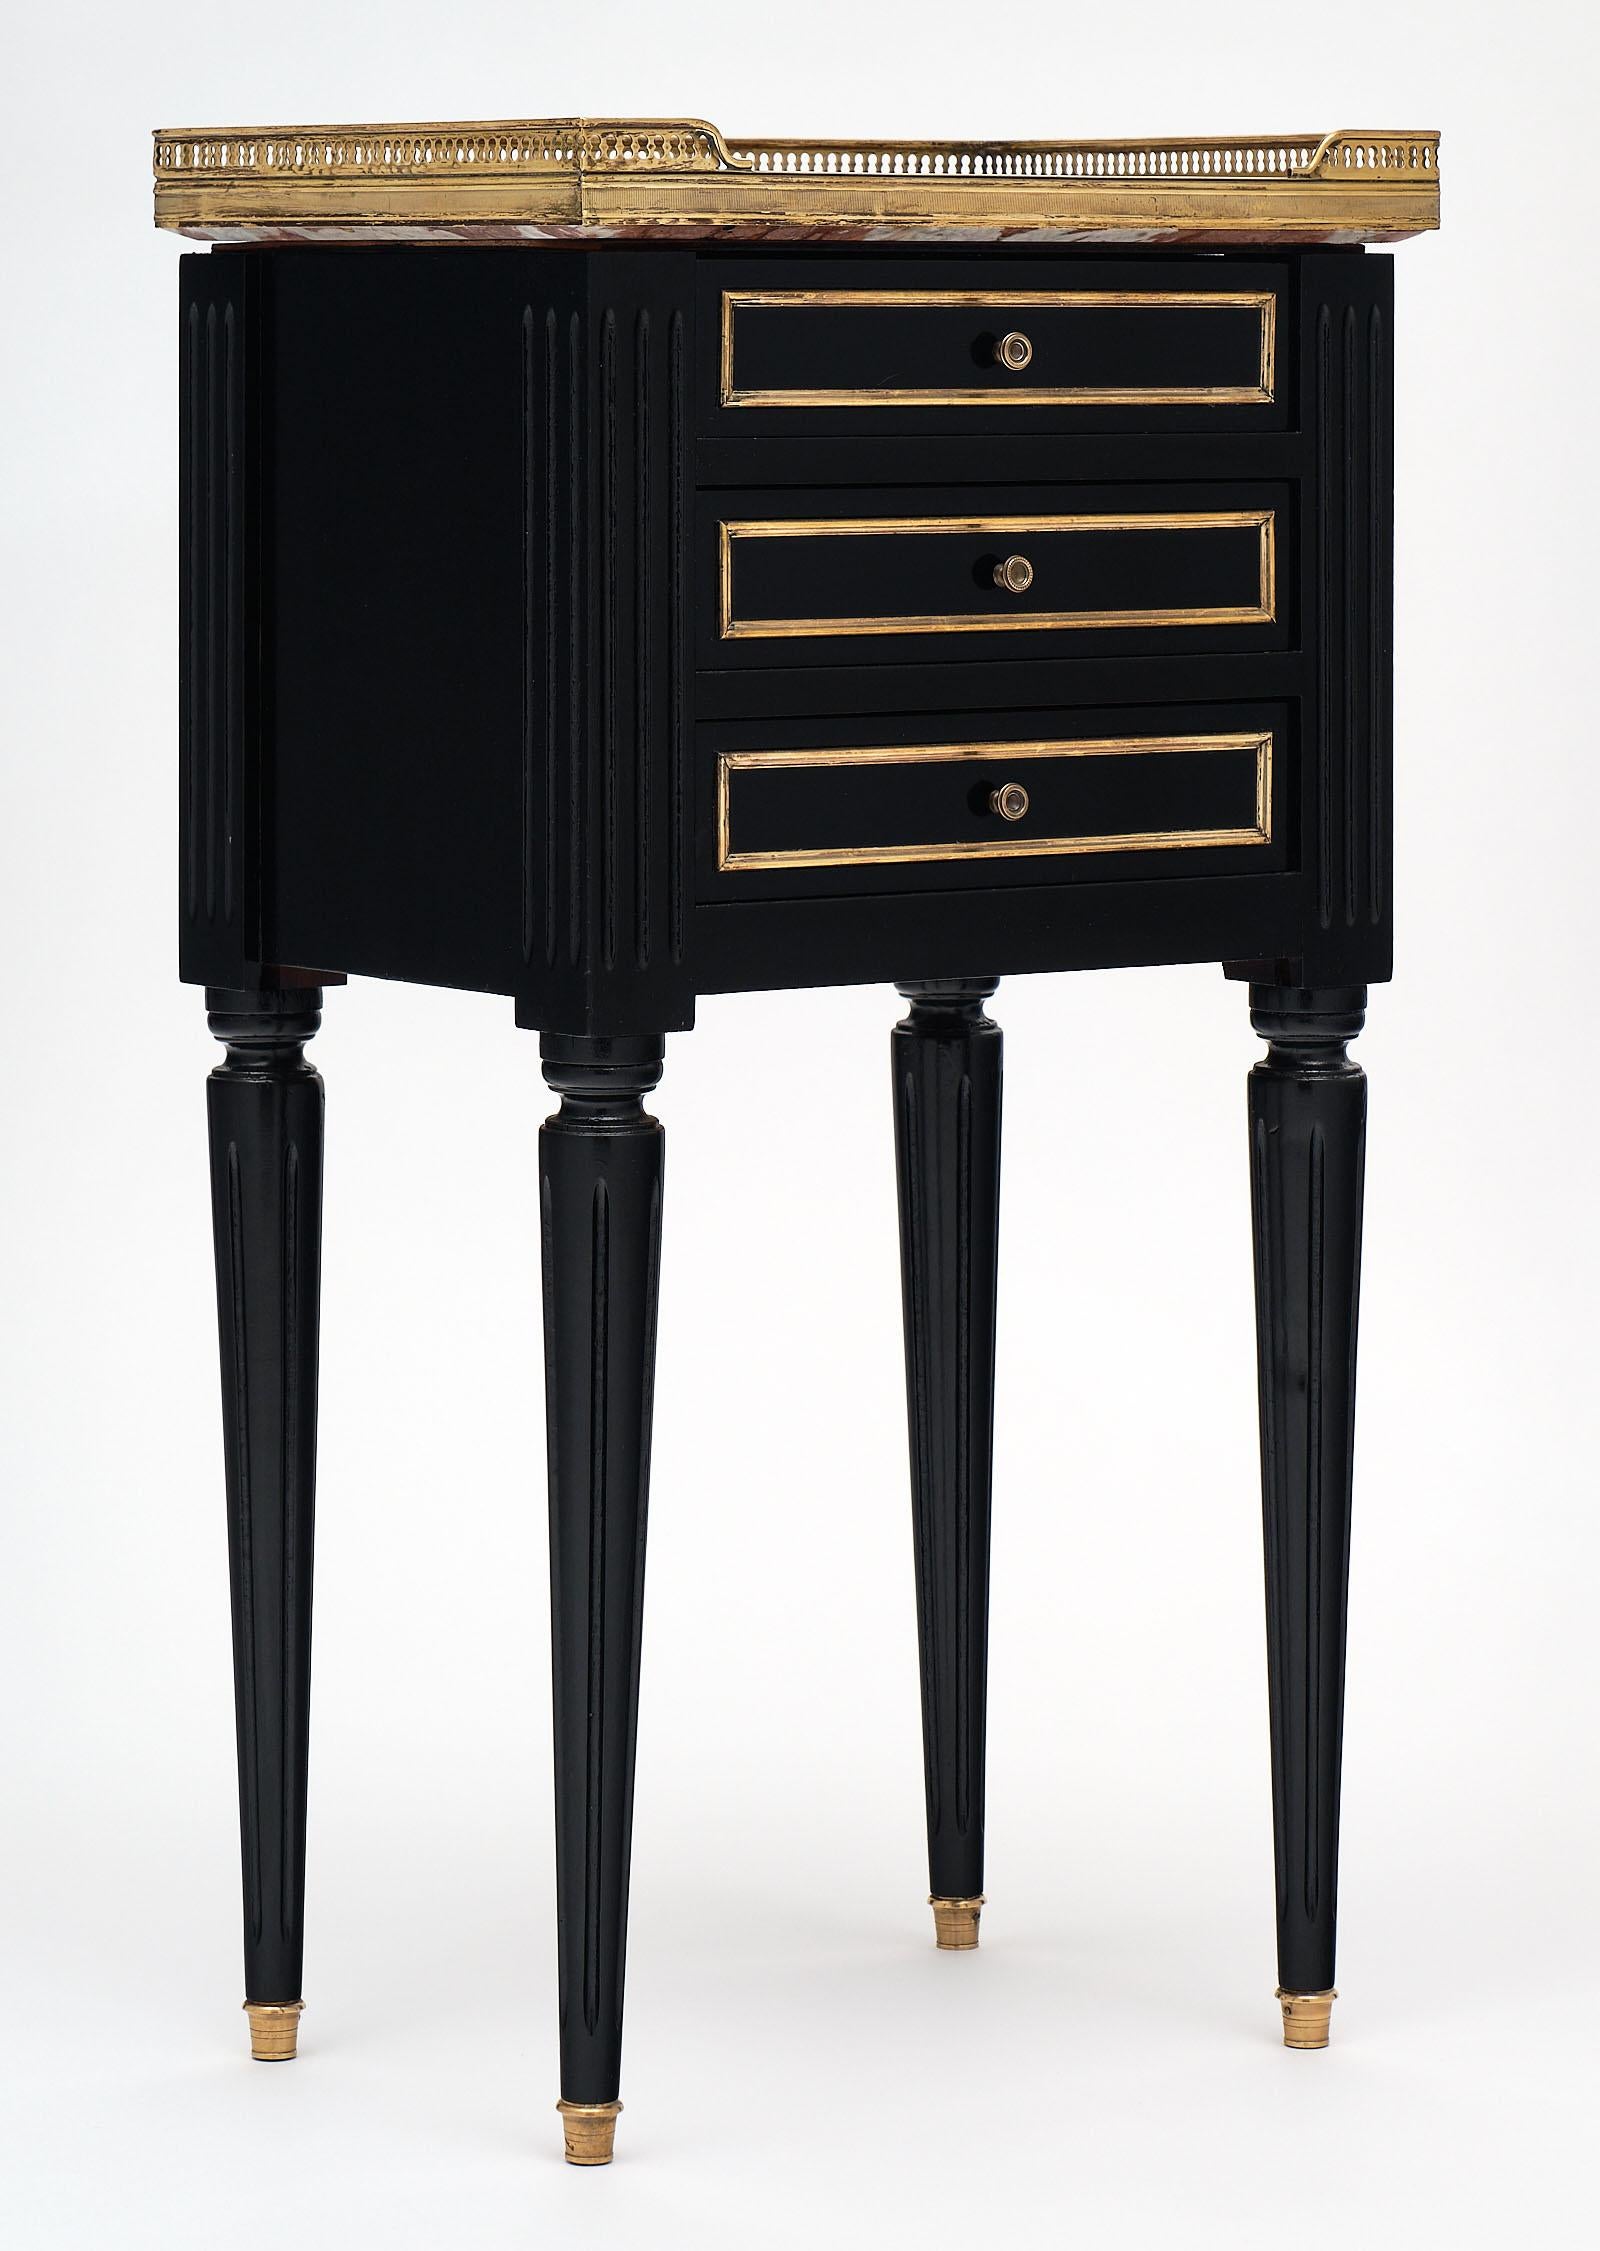 This French antique Louis XVI style side table boasts a unique red marble “rouge royal” top with striking white veining. Original brass gallery and trim on all three dovetailed drawers. This piece has been ebonized and finished with a French polish